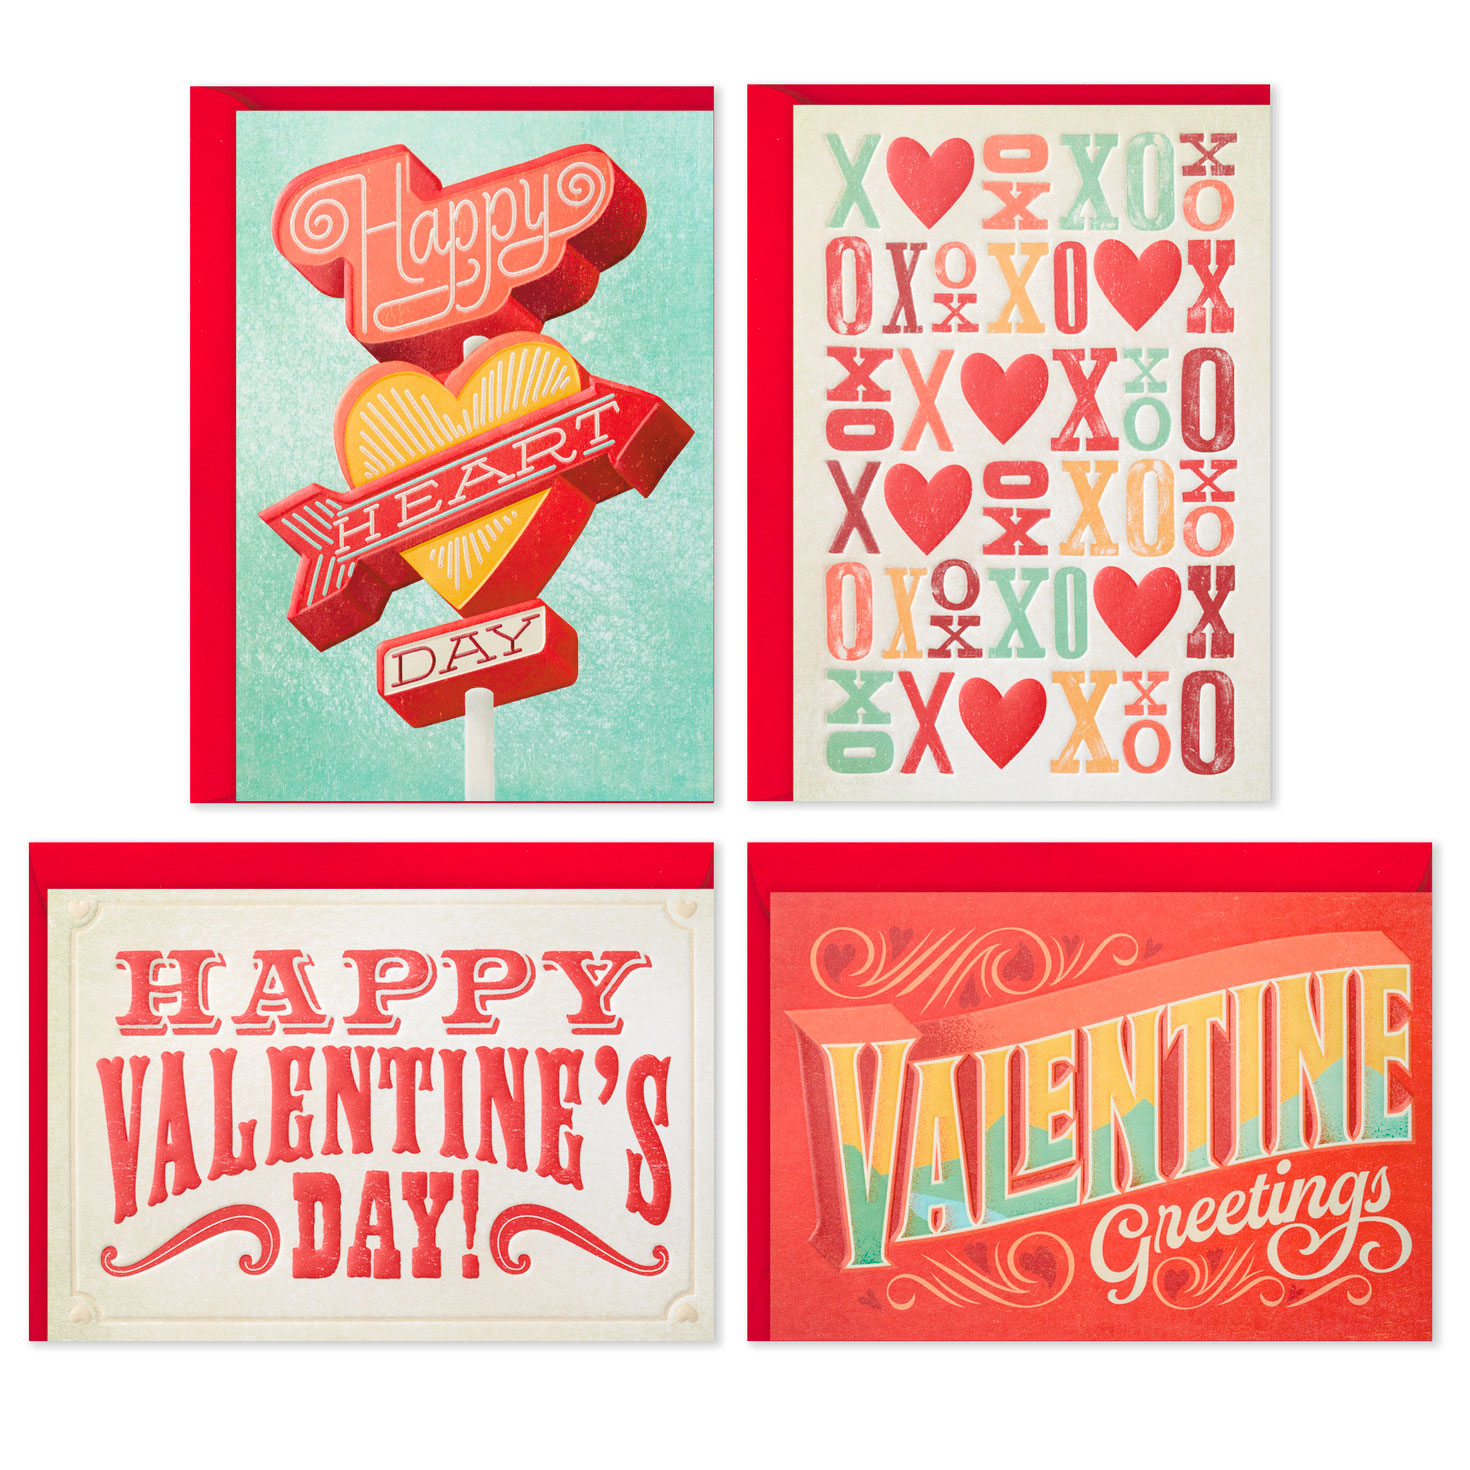 Vintage Signs Assorted Valentine's Day Cards, Pack of 24 - Boxed Cards